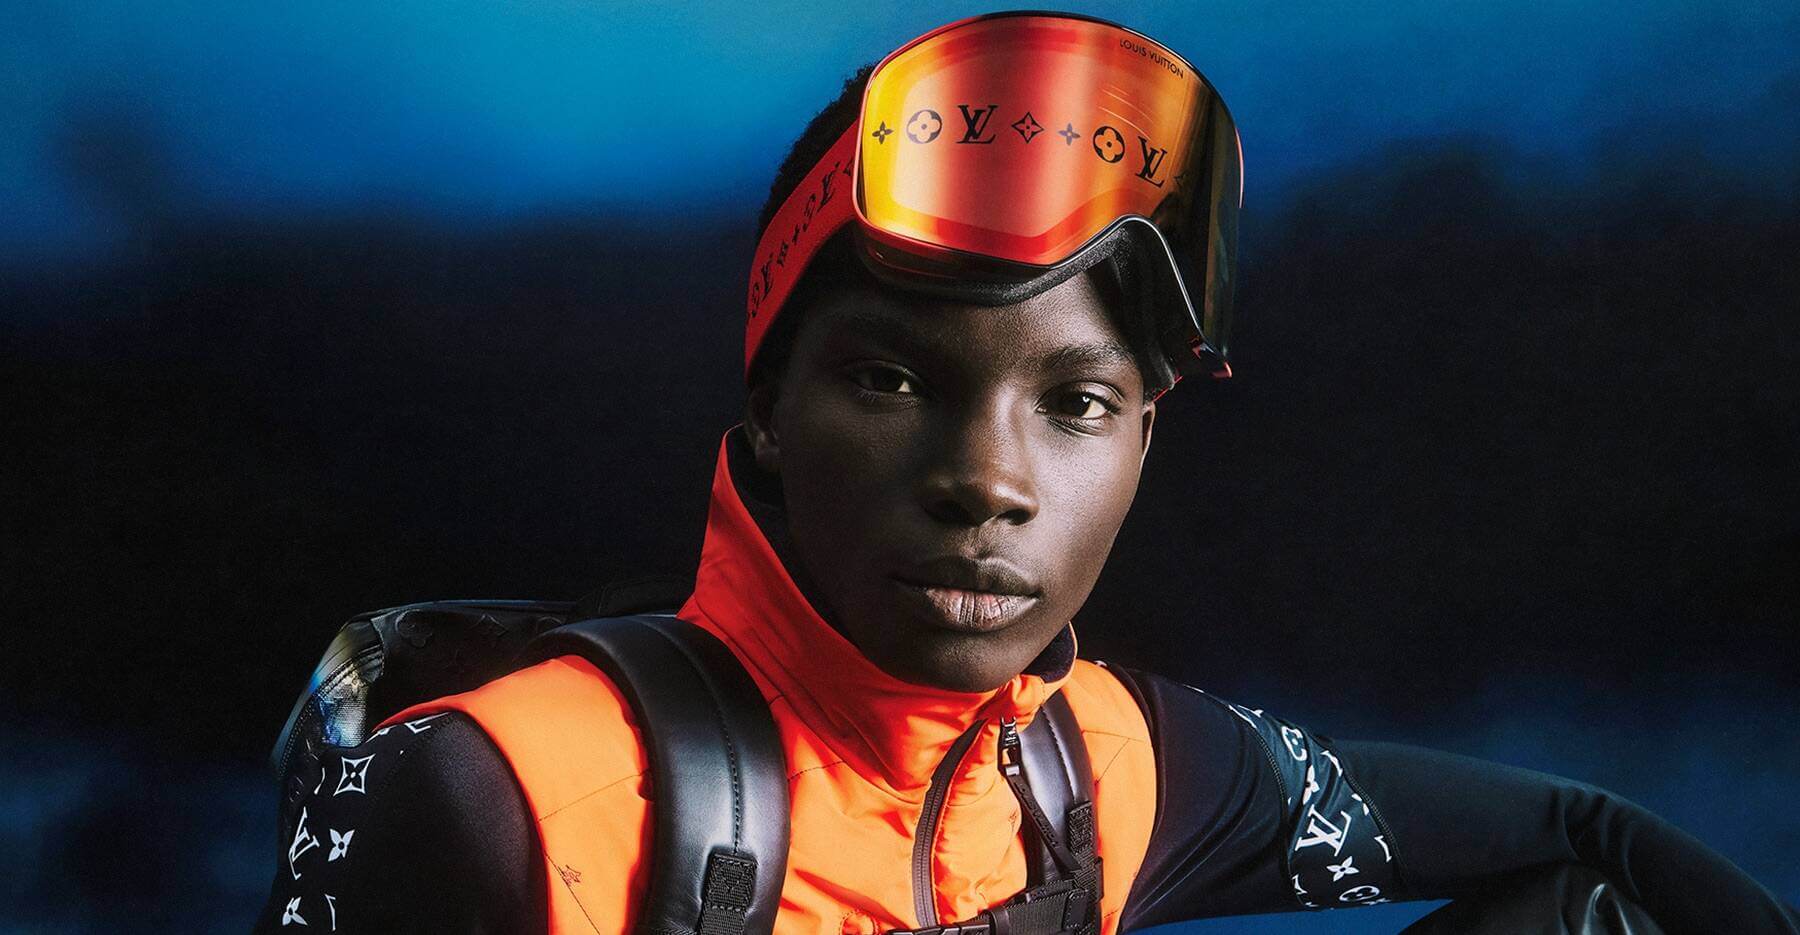 Louis Vuitton Hits The Slopes With Men's Skiwear Capsule - 10 Magazine